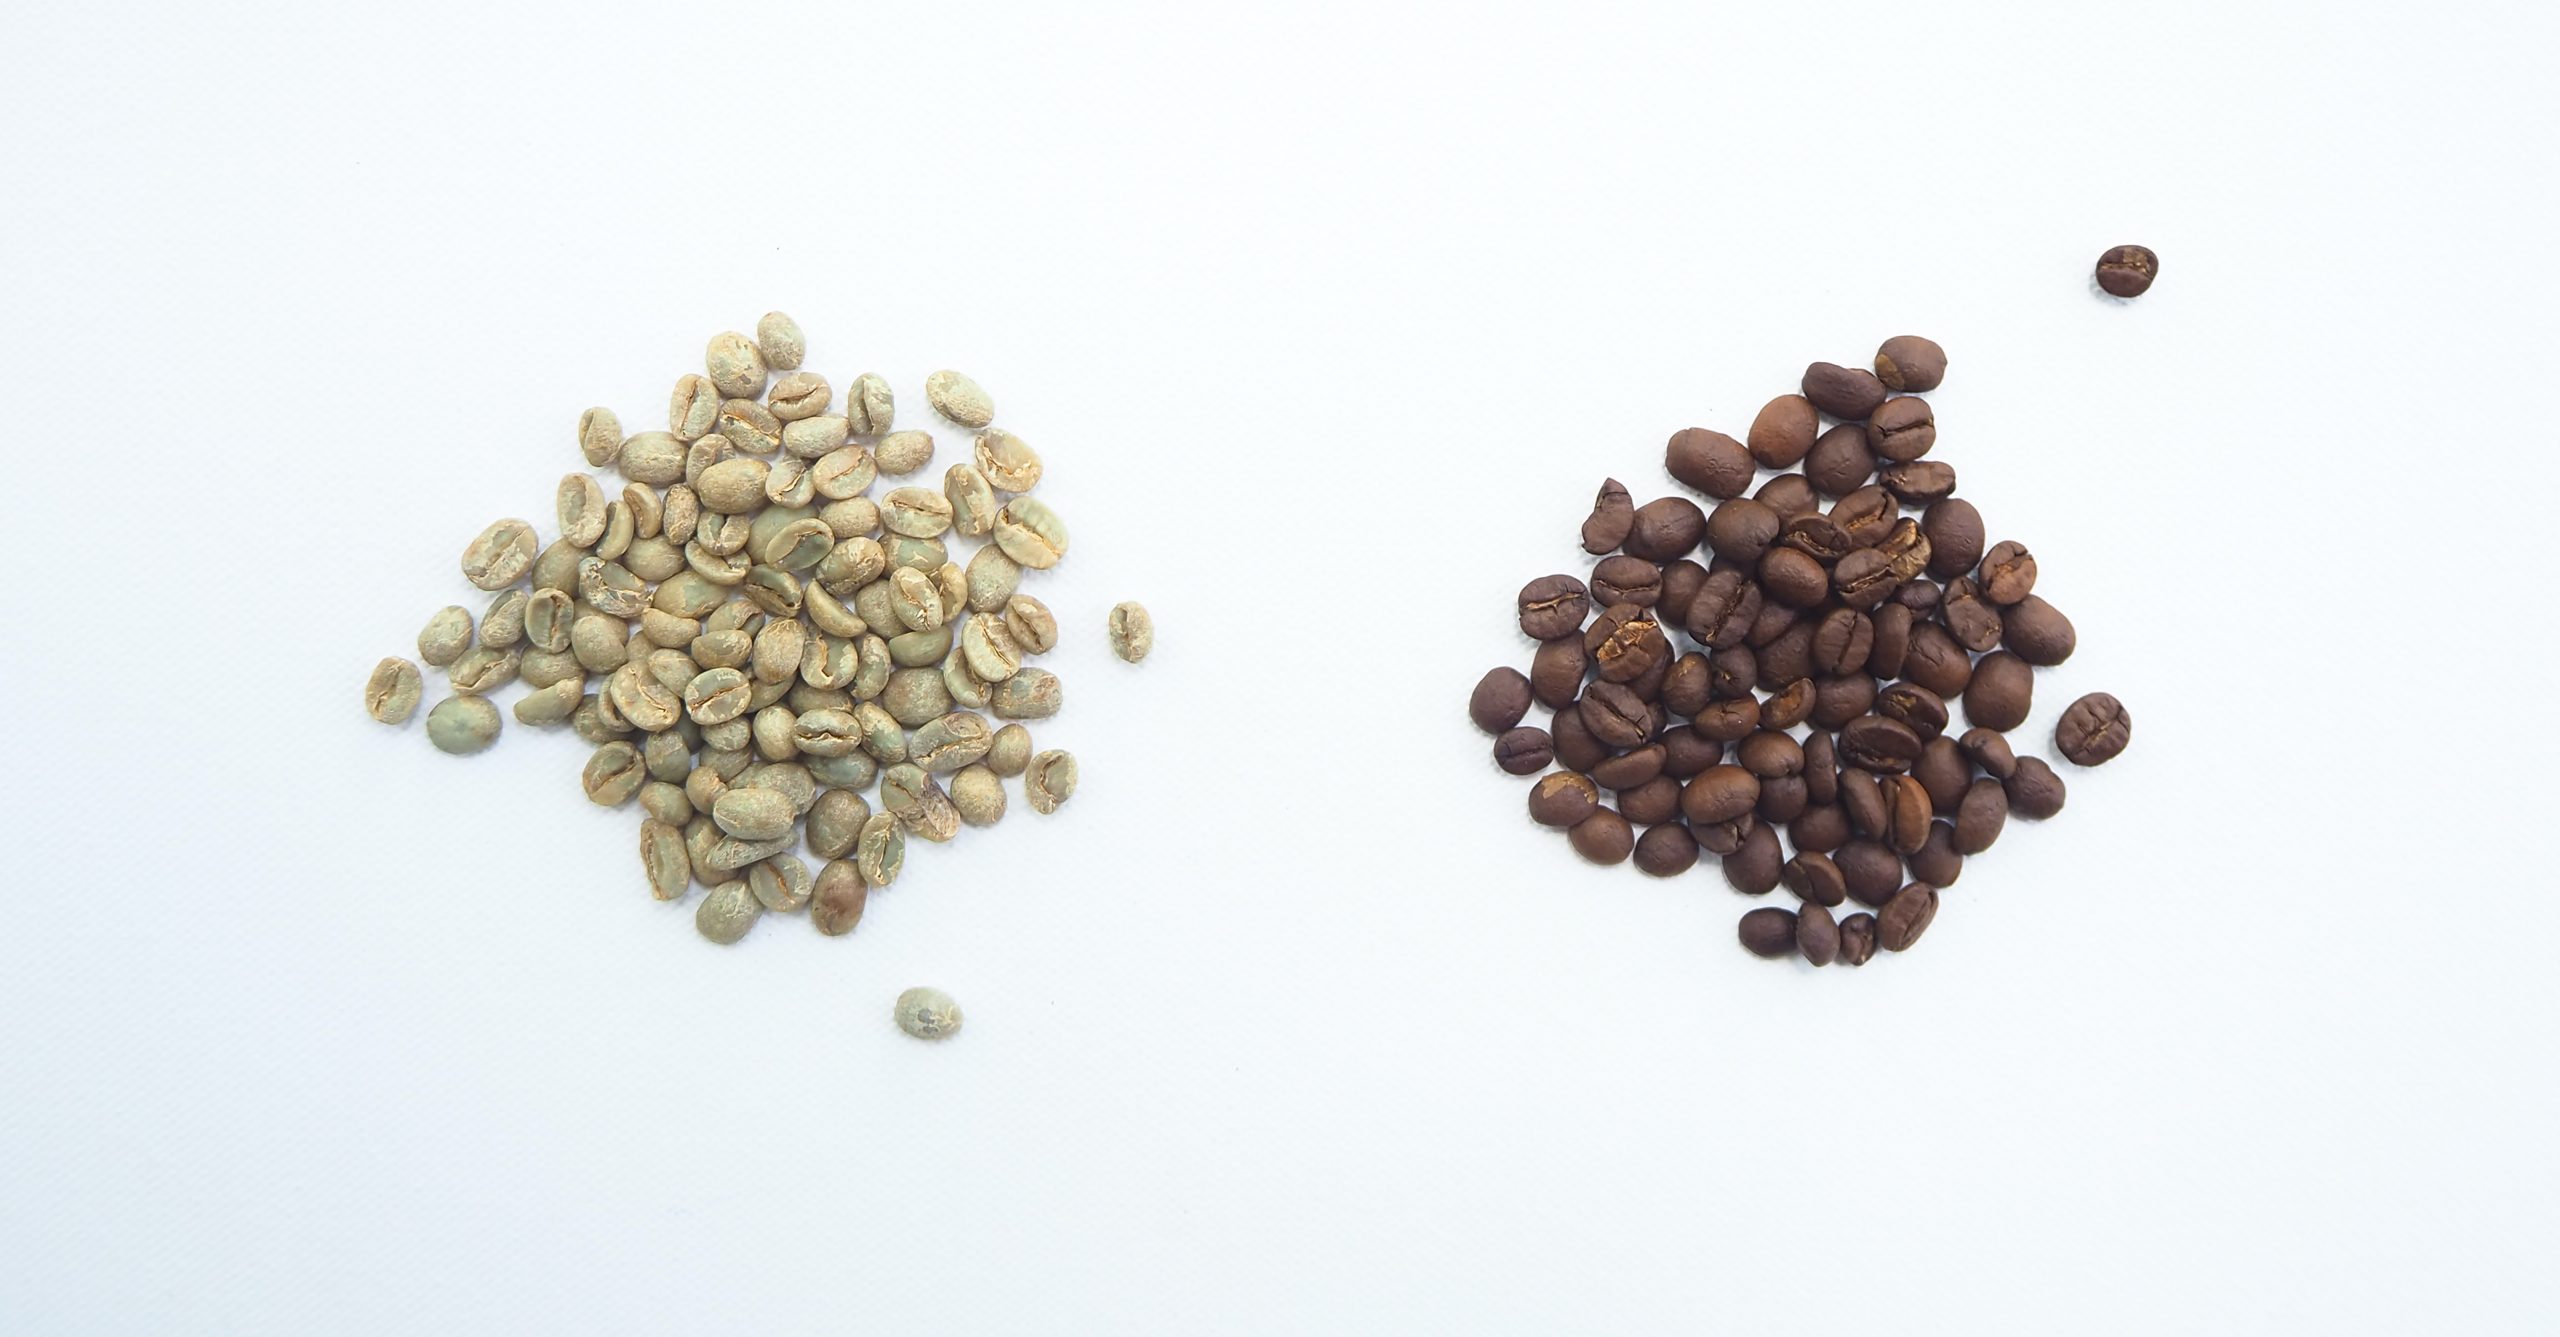 Image of two different piles of coffee beans, one light-coloured and one dark coloured